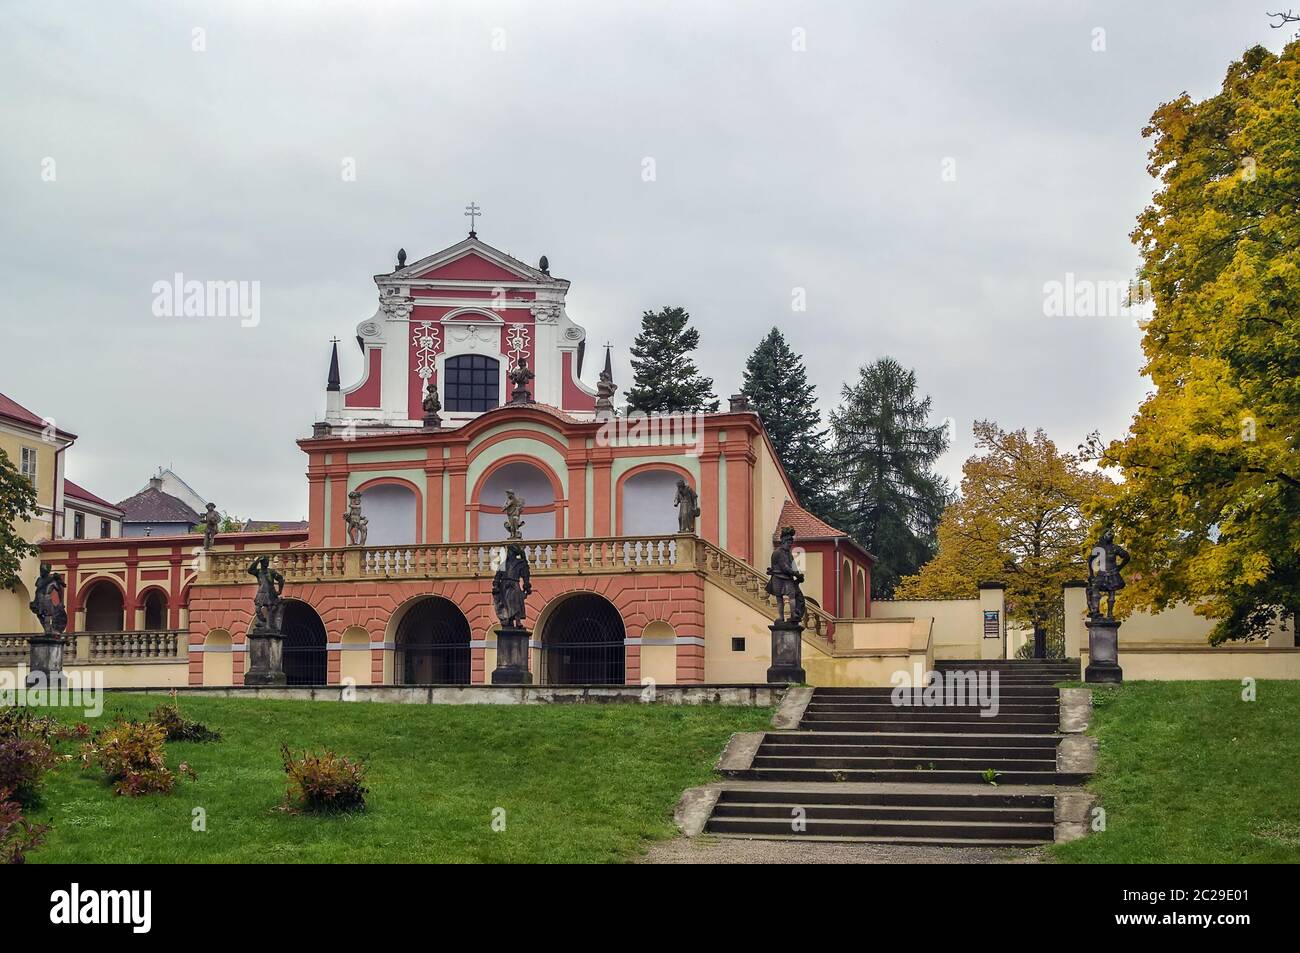 Klasterec Nad Ohri High Resolution Stock Photography and Images - Alamy